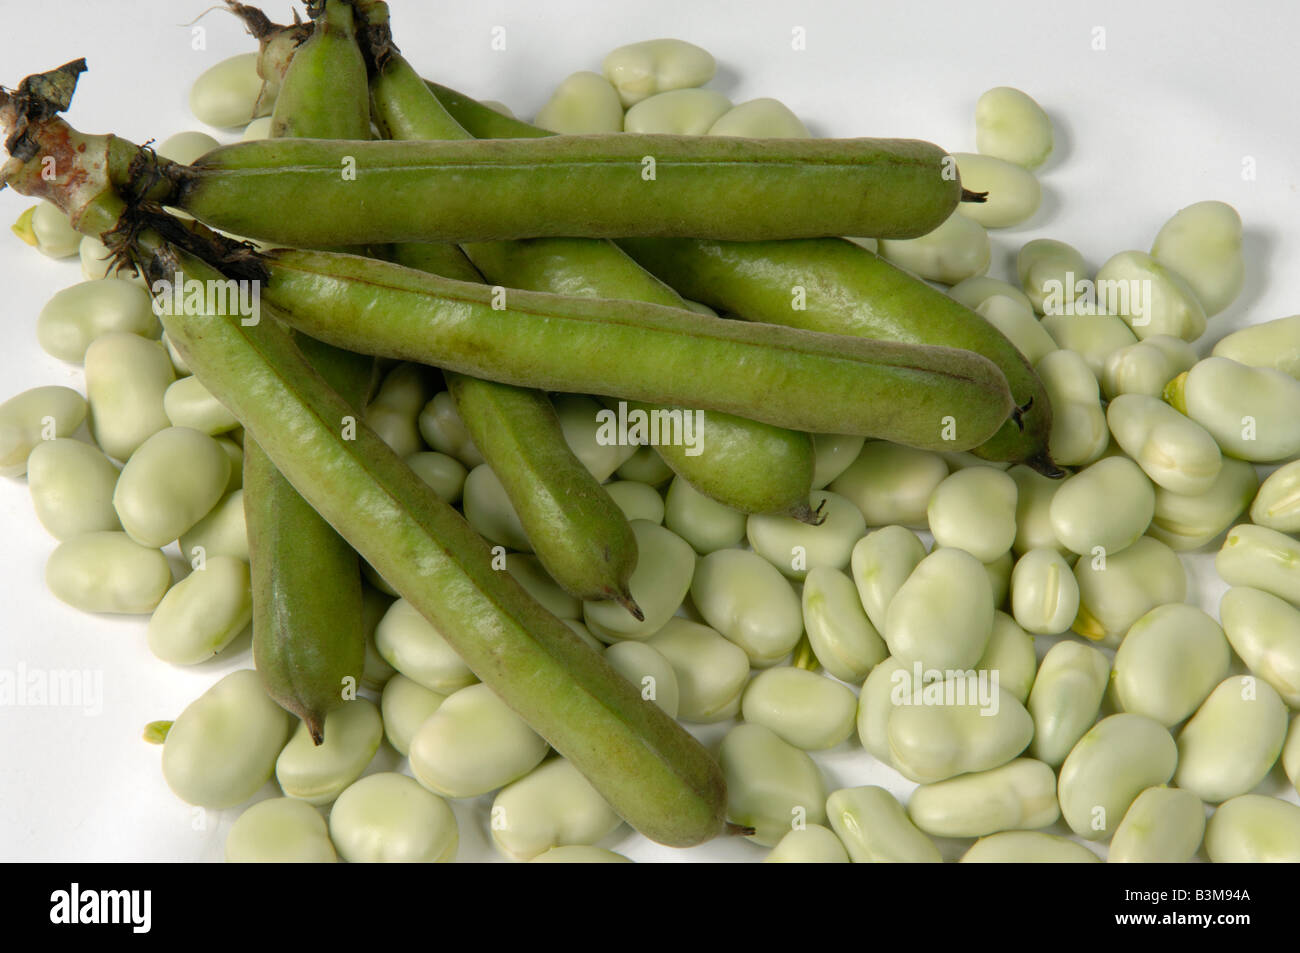 English grown vegetable produce typical supermarket bought broad beans whole and opend pods Stock Photo